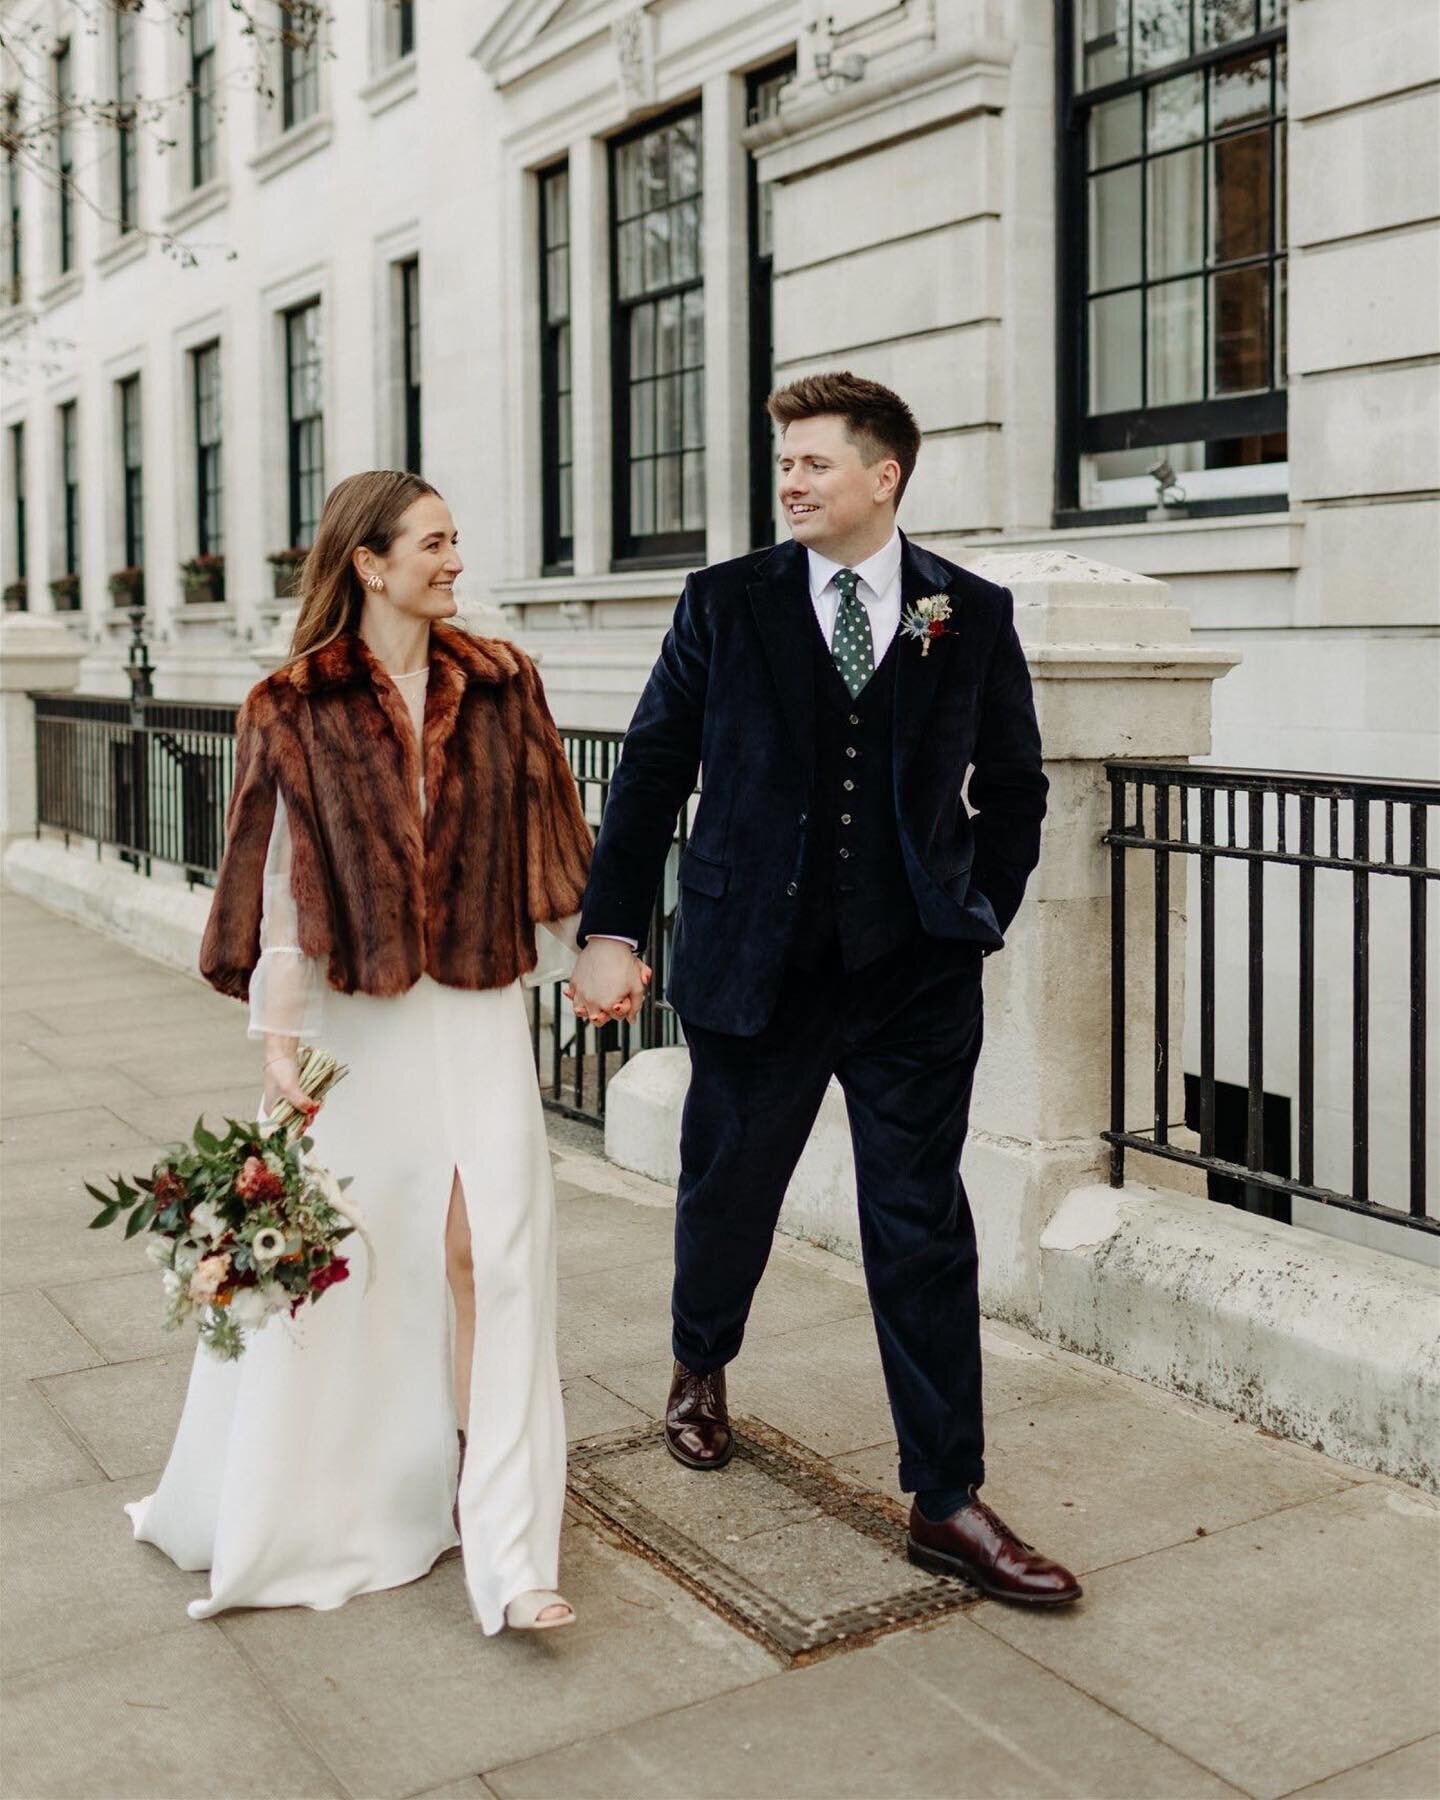 My last wedding of 2023 was tucked neatly between Christmas and New Year and was the perfect opportunity for Bex, Ollie + their guests to step out in their finest winter glam, party under twinkling lights and celebrate with mulled wine and espresso m